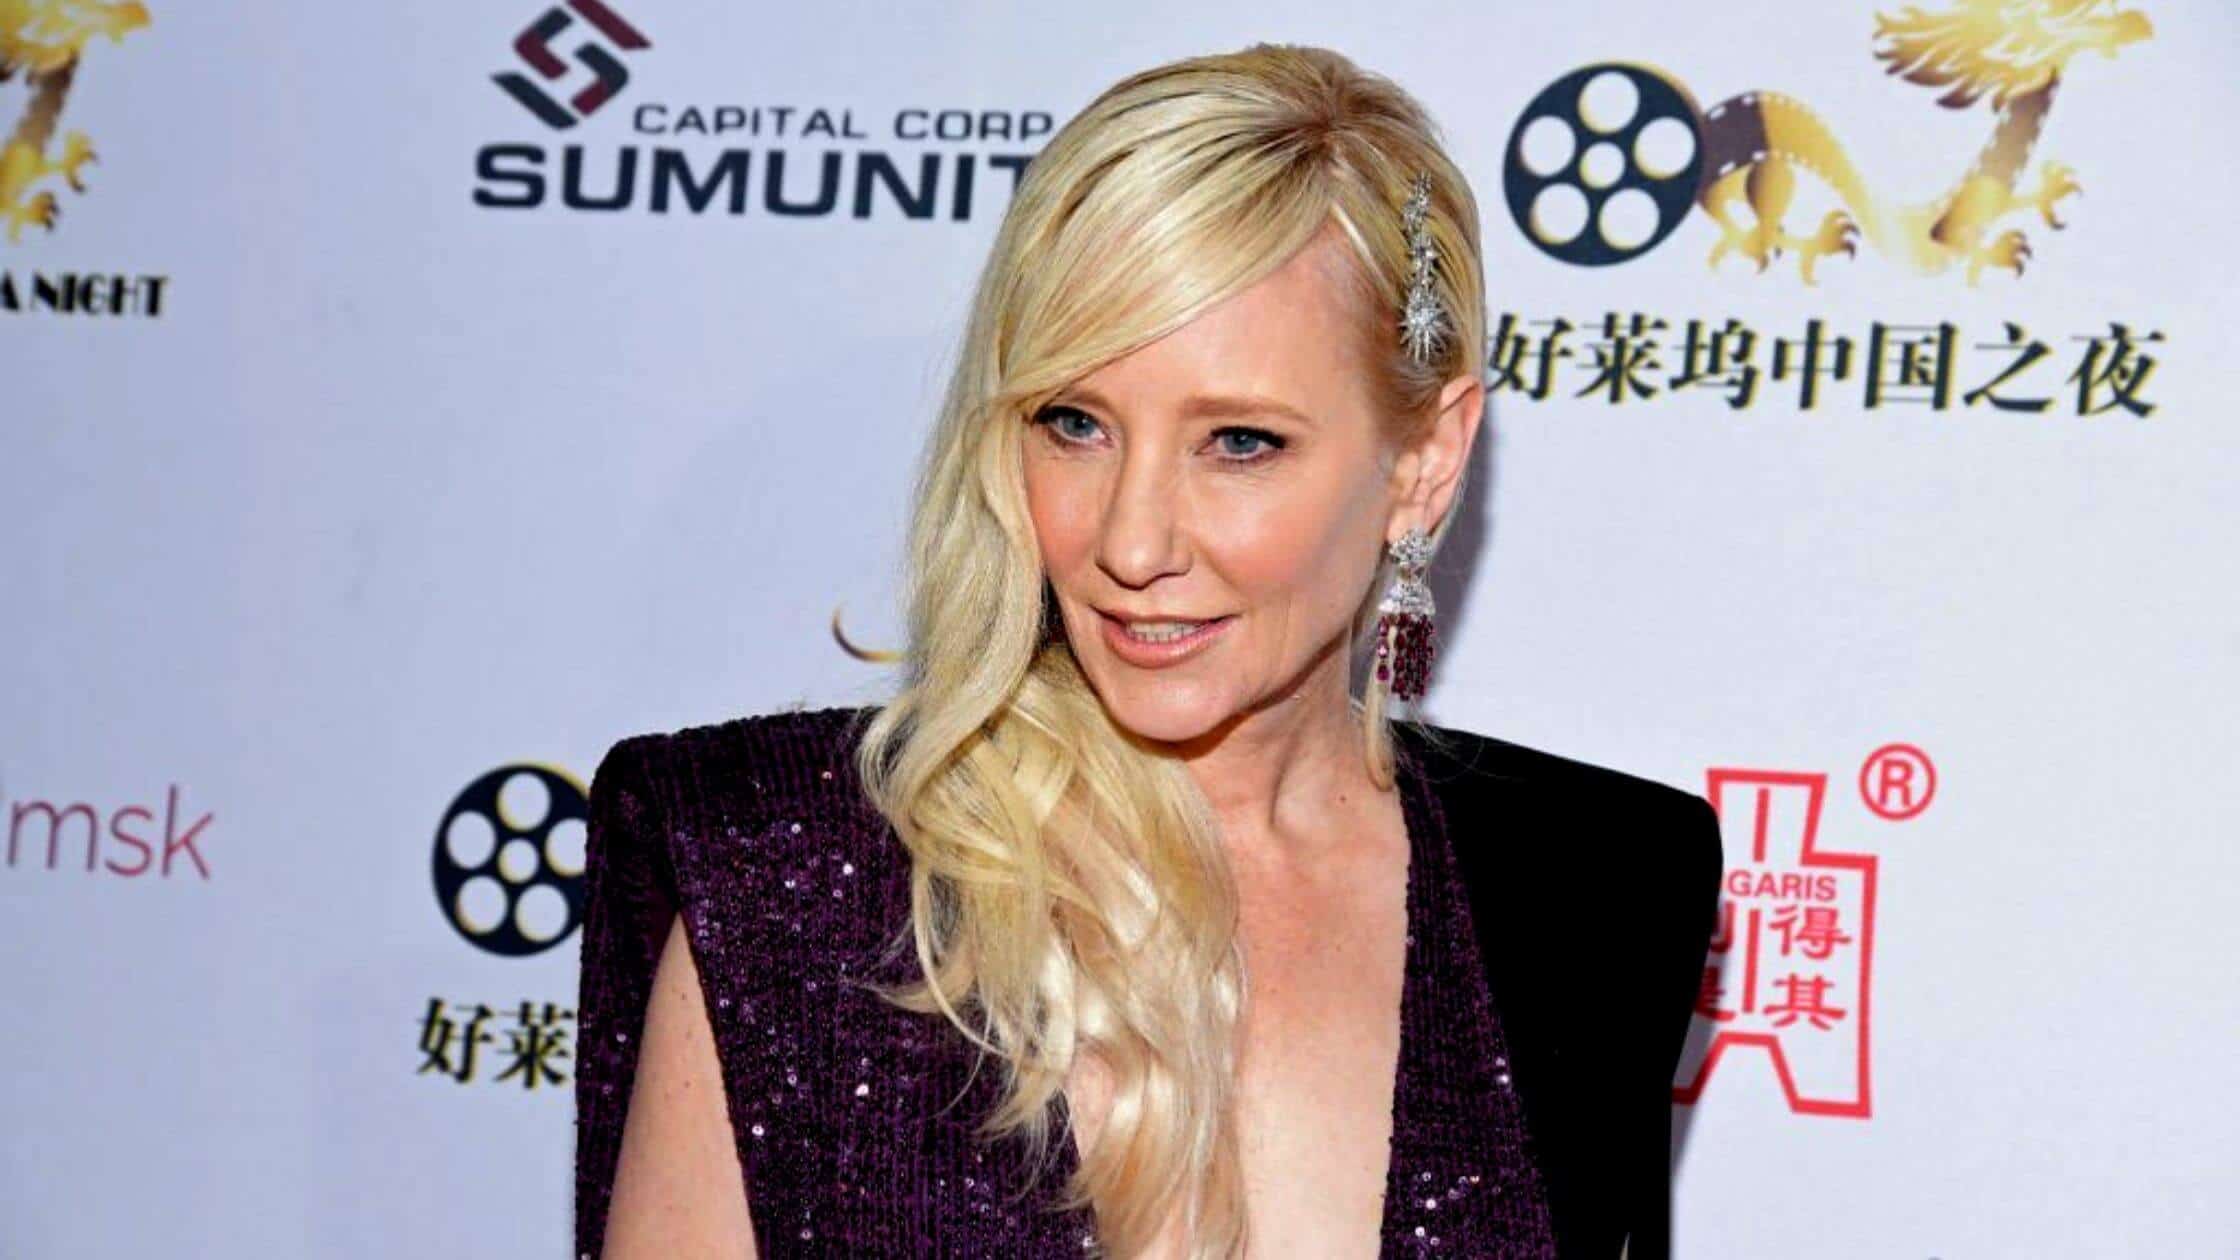 Anne Heche Was Not Under The Influence When The Fatal Accident Occurred Autopsy